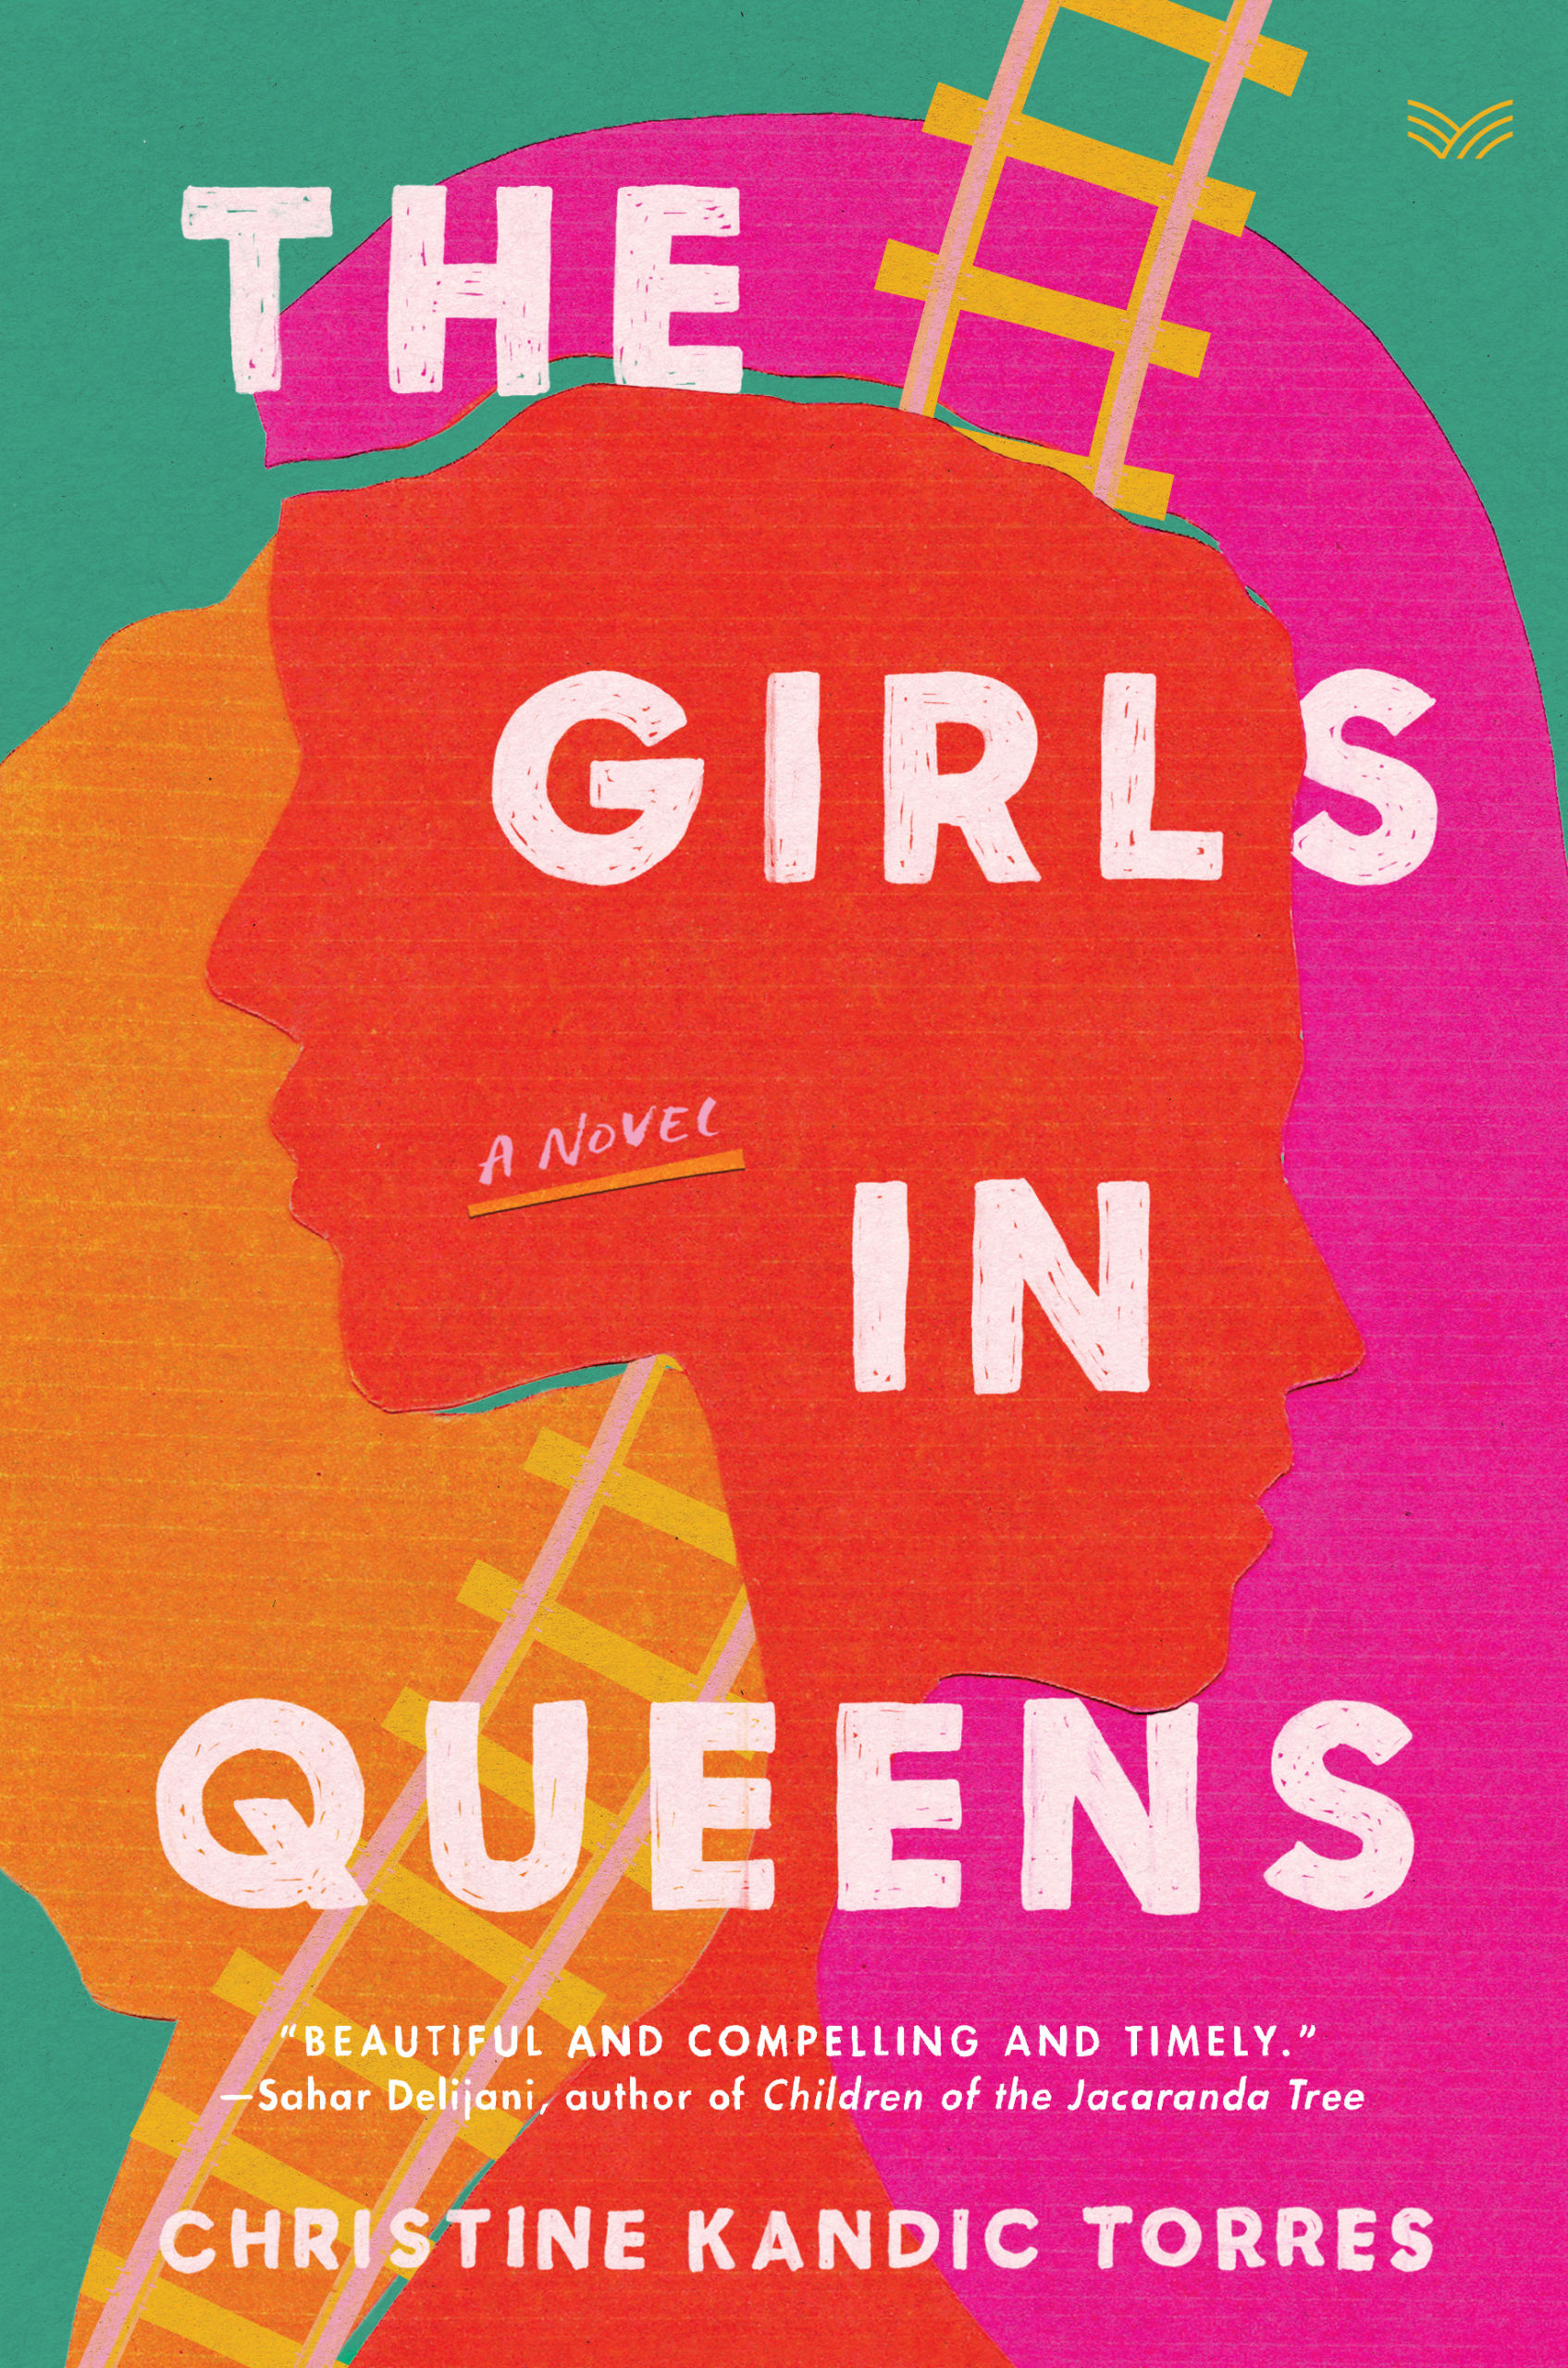 Brooklyn College Graduate Christine Kandic Torres writes timely debut novel ‘The Girl in Queens’￼